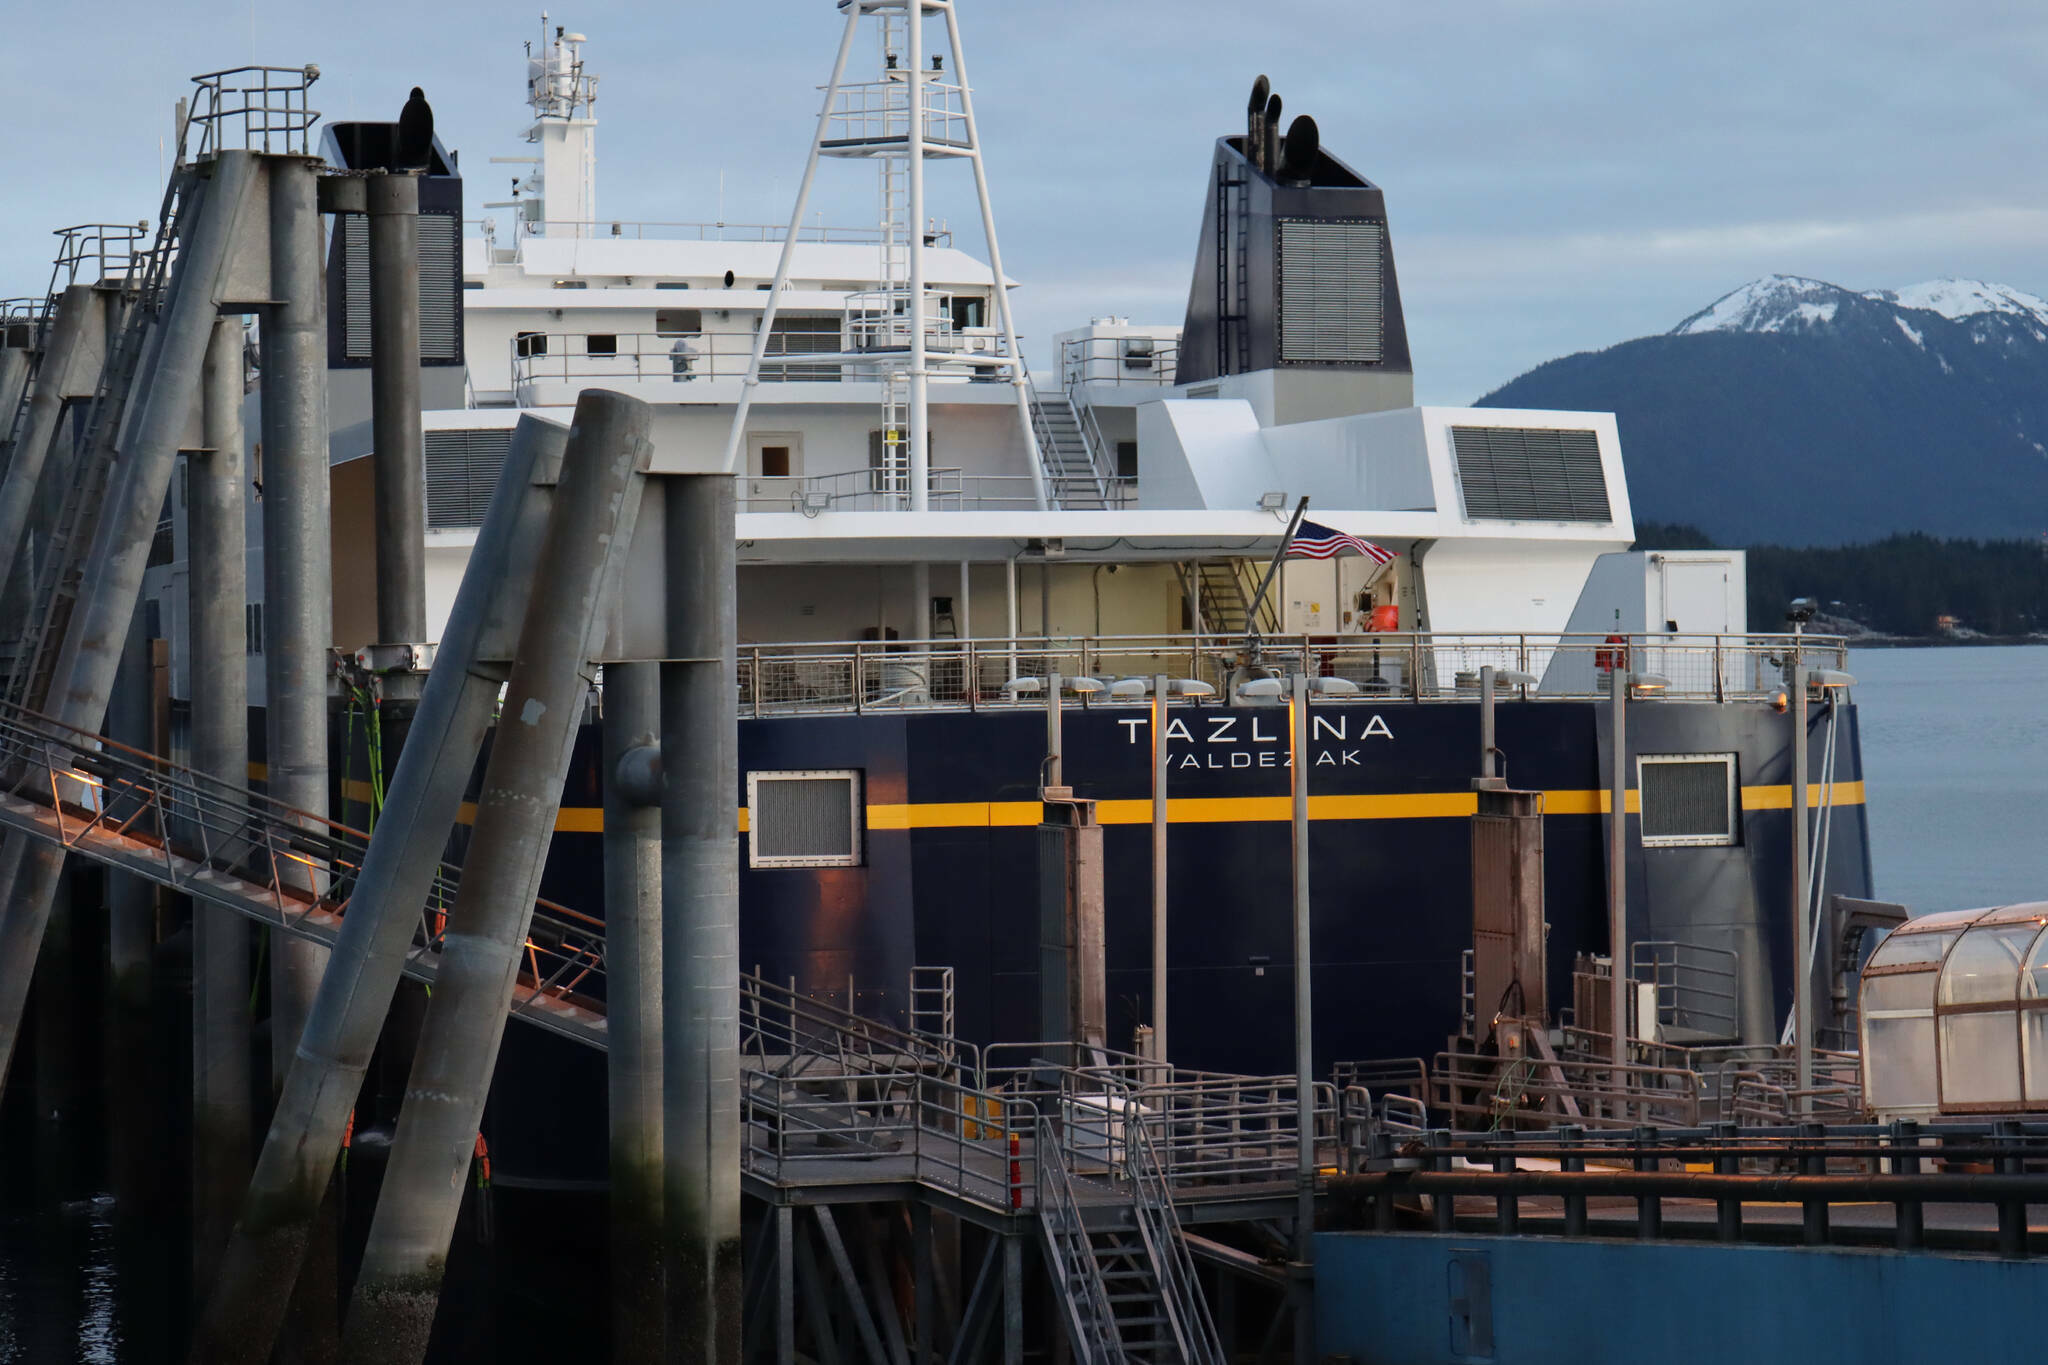 Ben Hohenstatt / Juneau Empire 
The MV Tazlina is docked at the Auke Bay ferry terminal this Nov. 15, 2021, photo. The Alaska Marine Highway System is among the biggest Juneau beneficiaries of nearly $3 billion in state funds so far allocated from the Infrastructure Investment and Jobs Act, which U.S. Sen. Lisa Murkowski played a key role in drafting. Funds will go toward upgrading existing vessels and providing new ferry infrastructure.